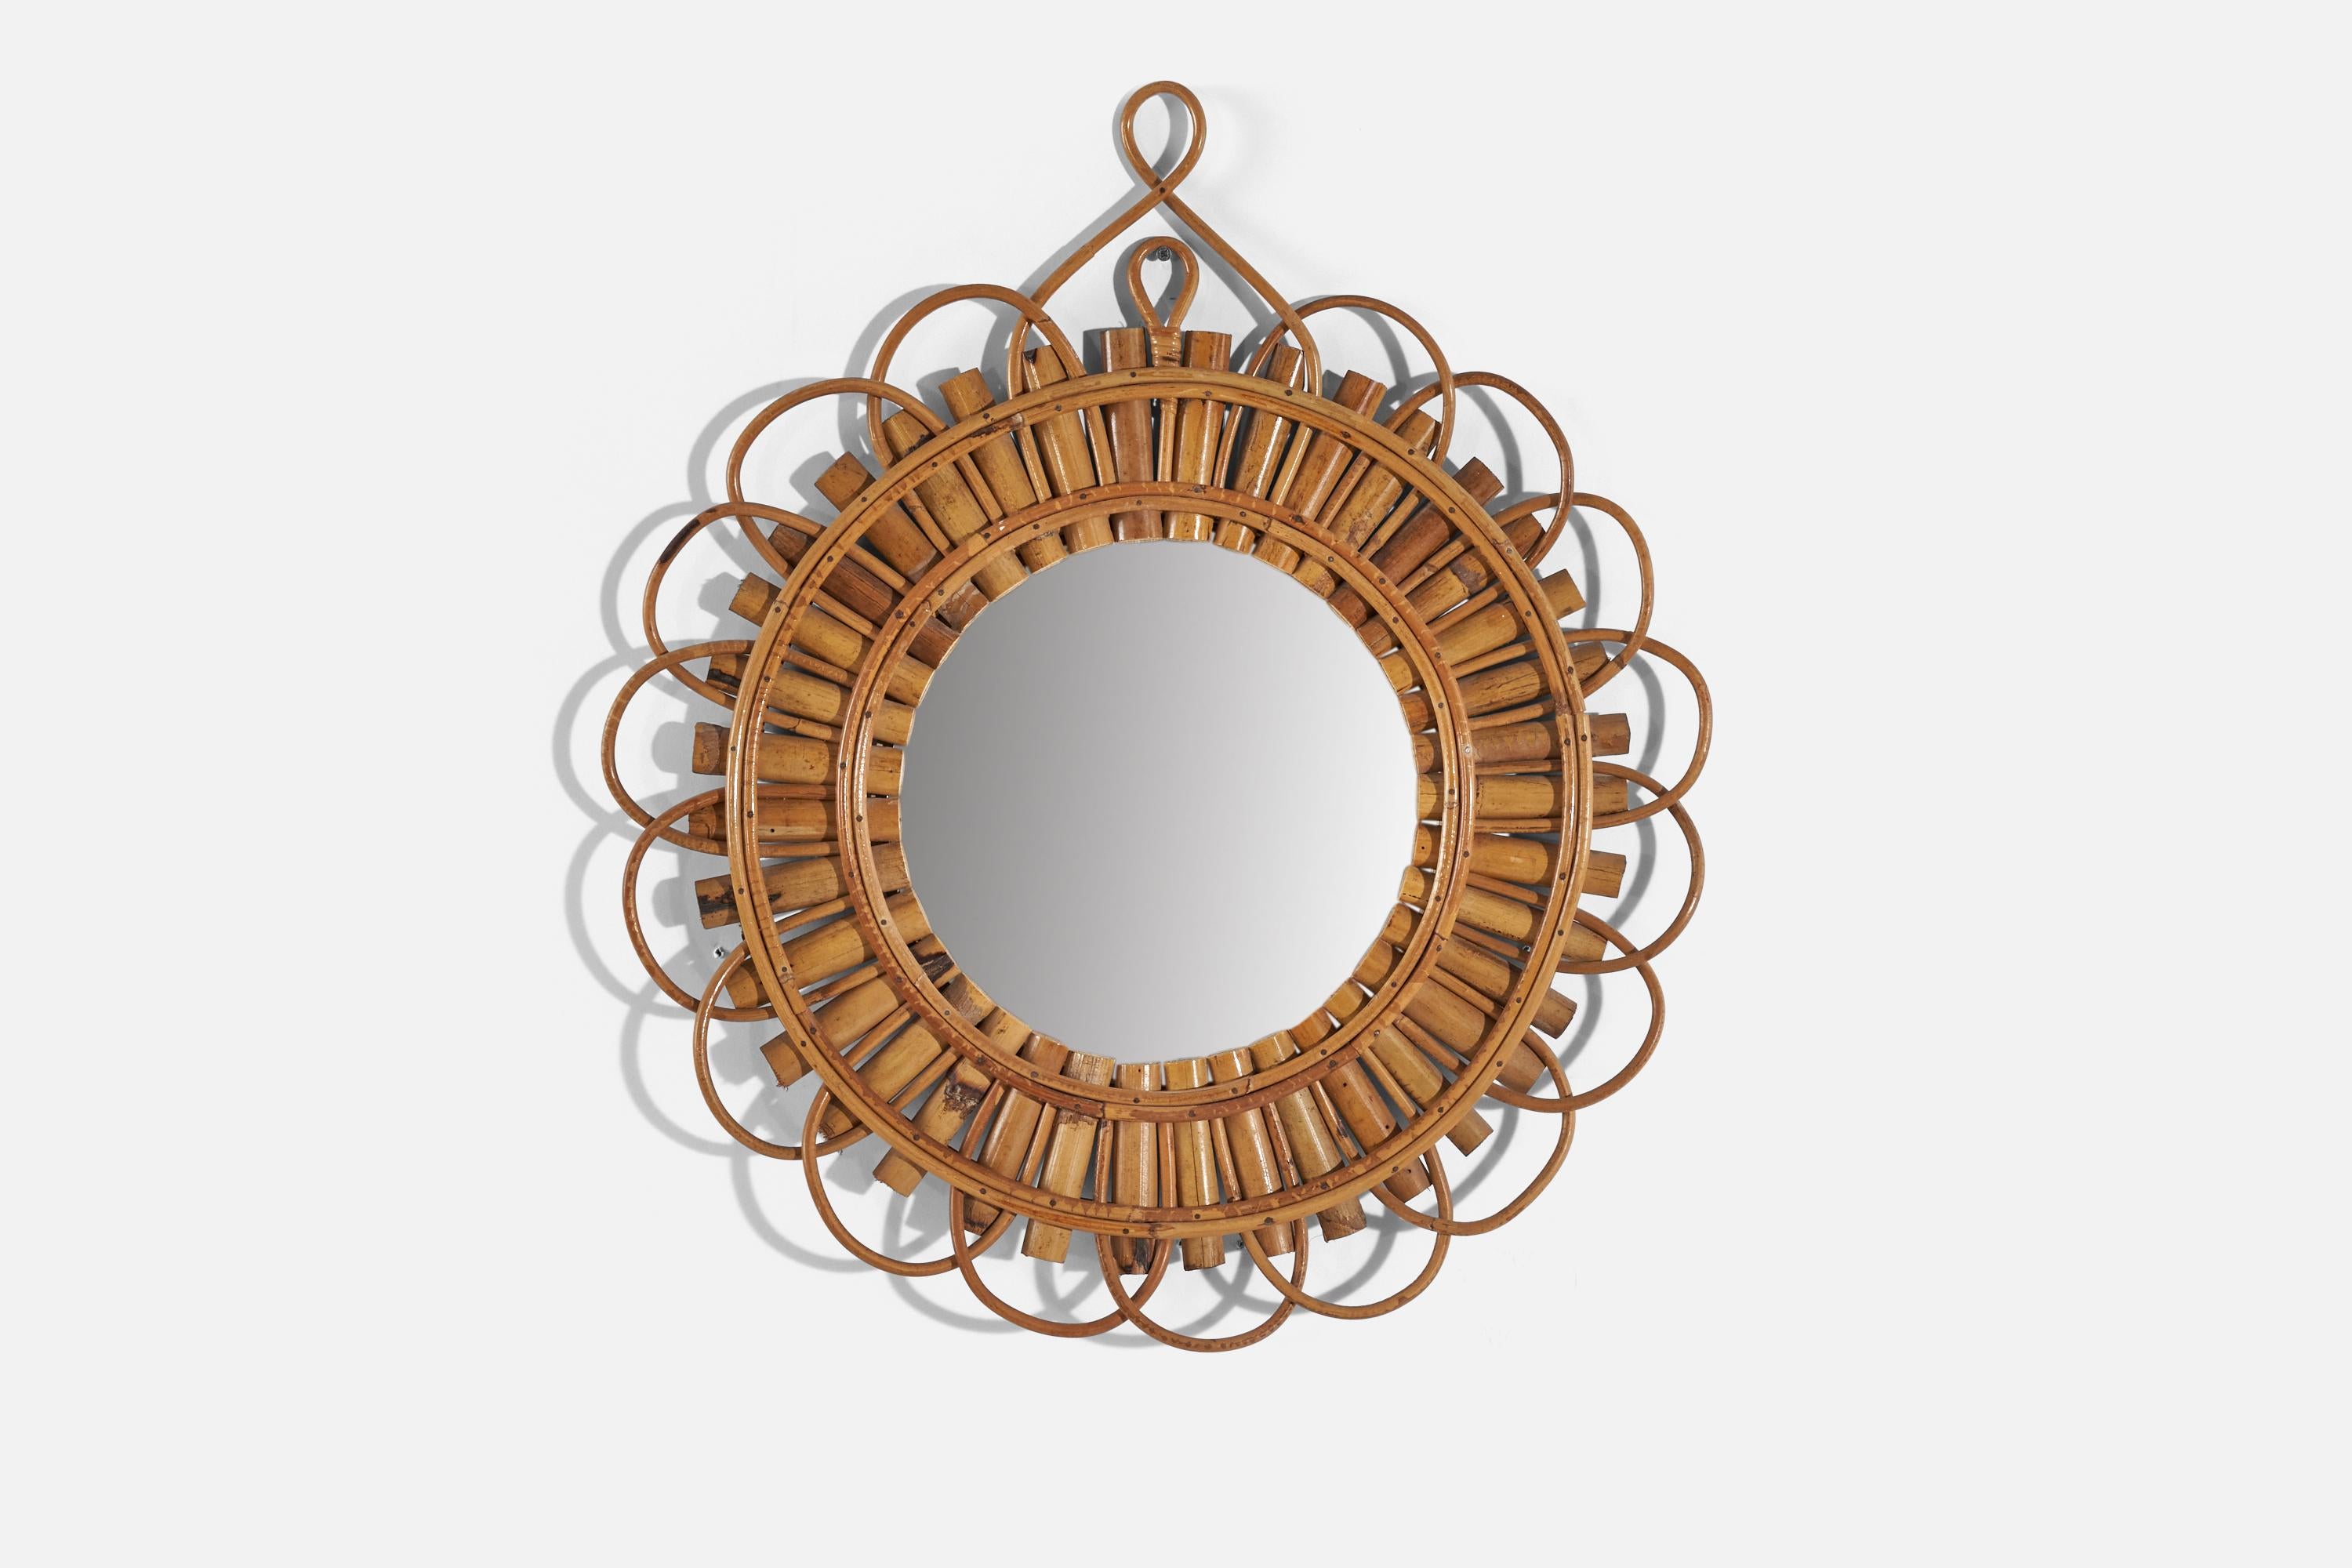 A rattan wall mirror designed and produced by an Italian designer, Italy, 1950s-1960s.
   